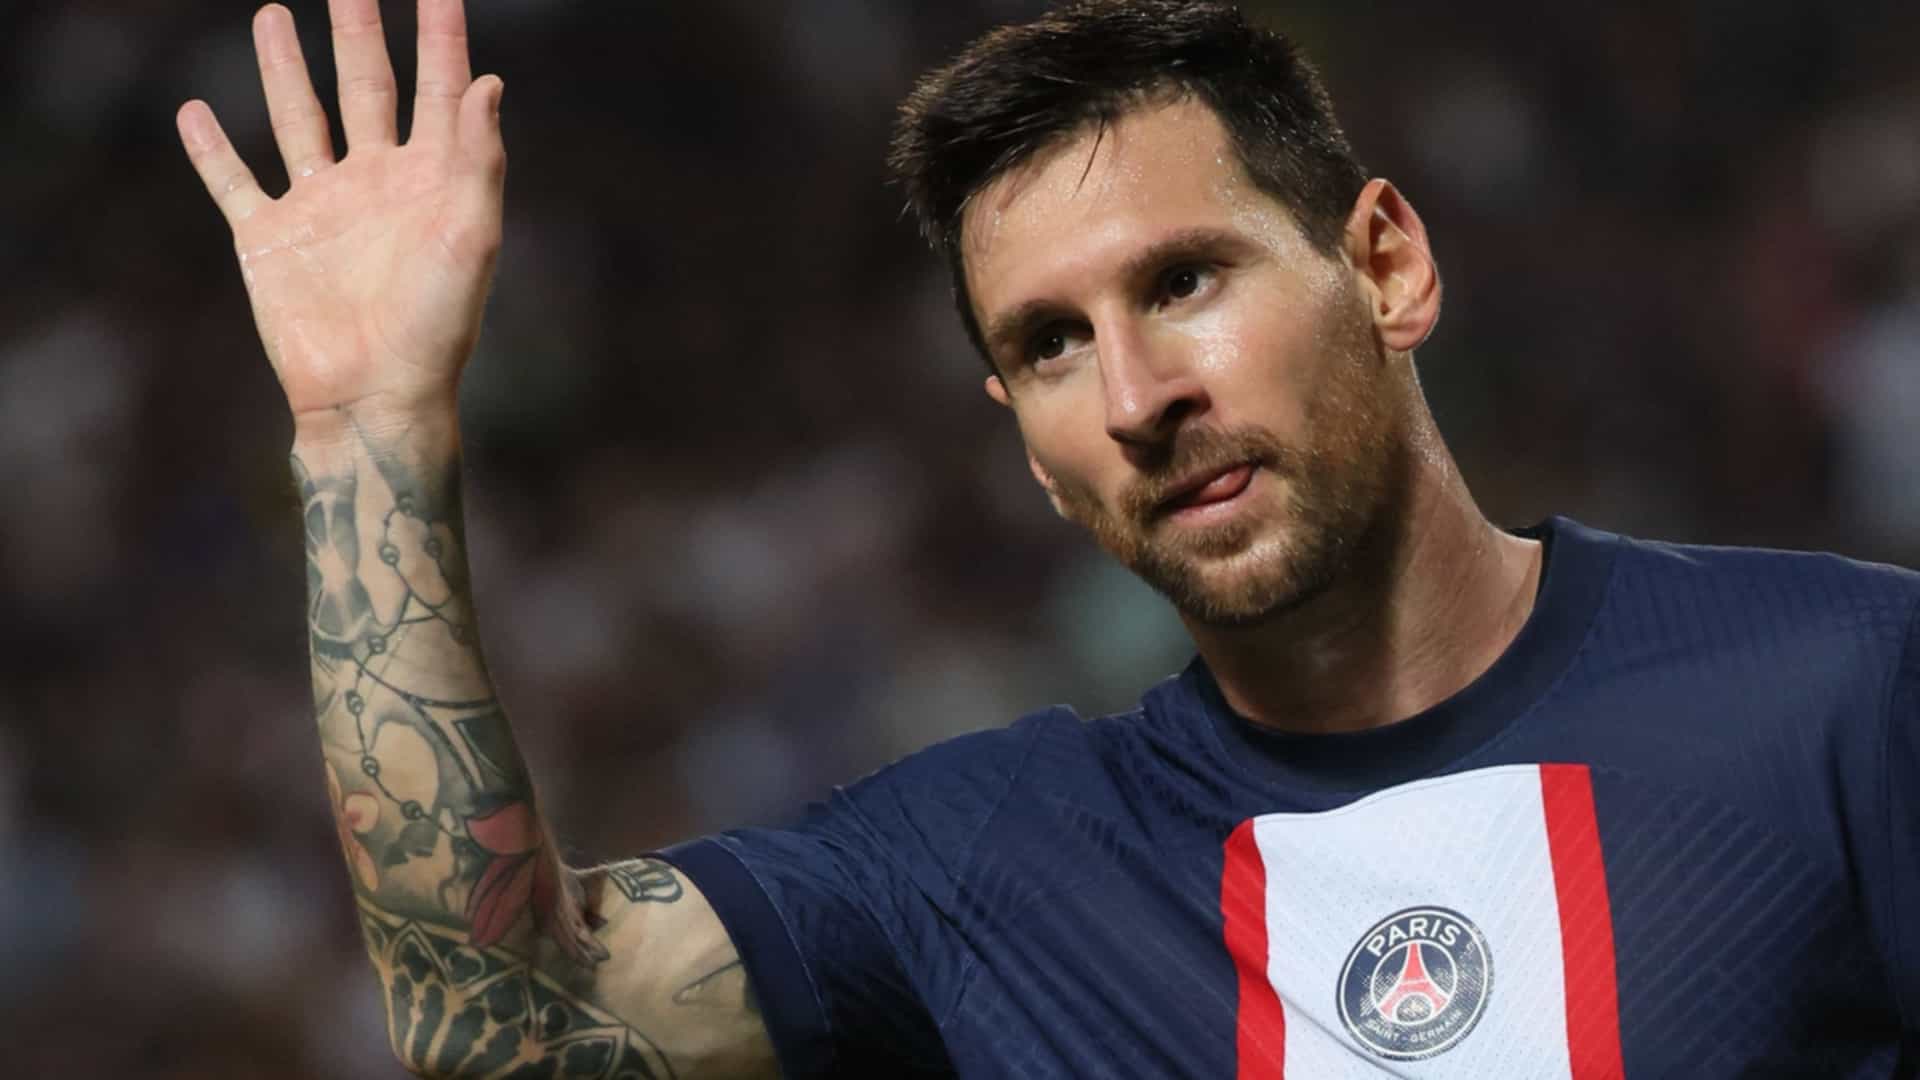 Lionel Messi two trophies behind Dani Alves as most decorated footballer as Sergio Ramos scores back-heel like Alessia Russo in PSG Trophee des Champions vicory